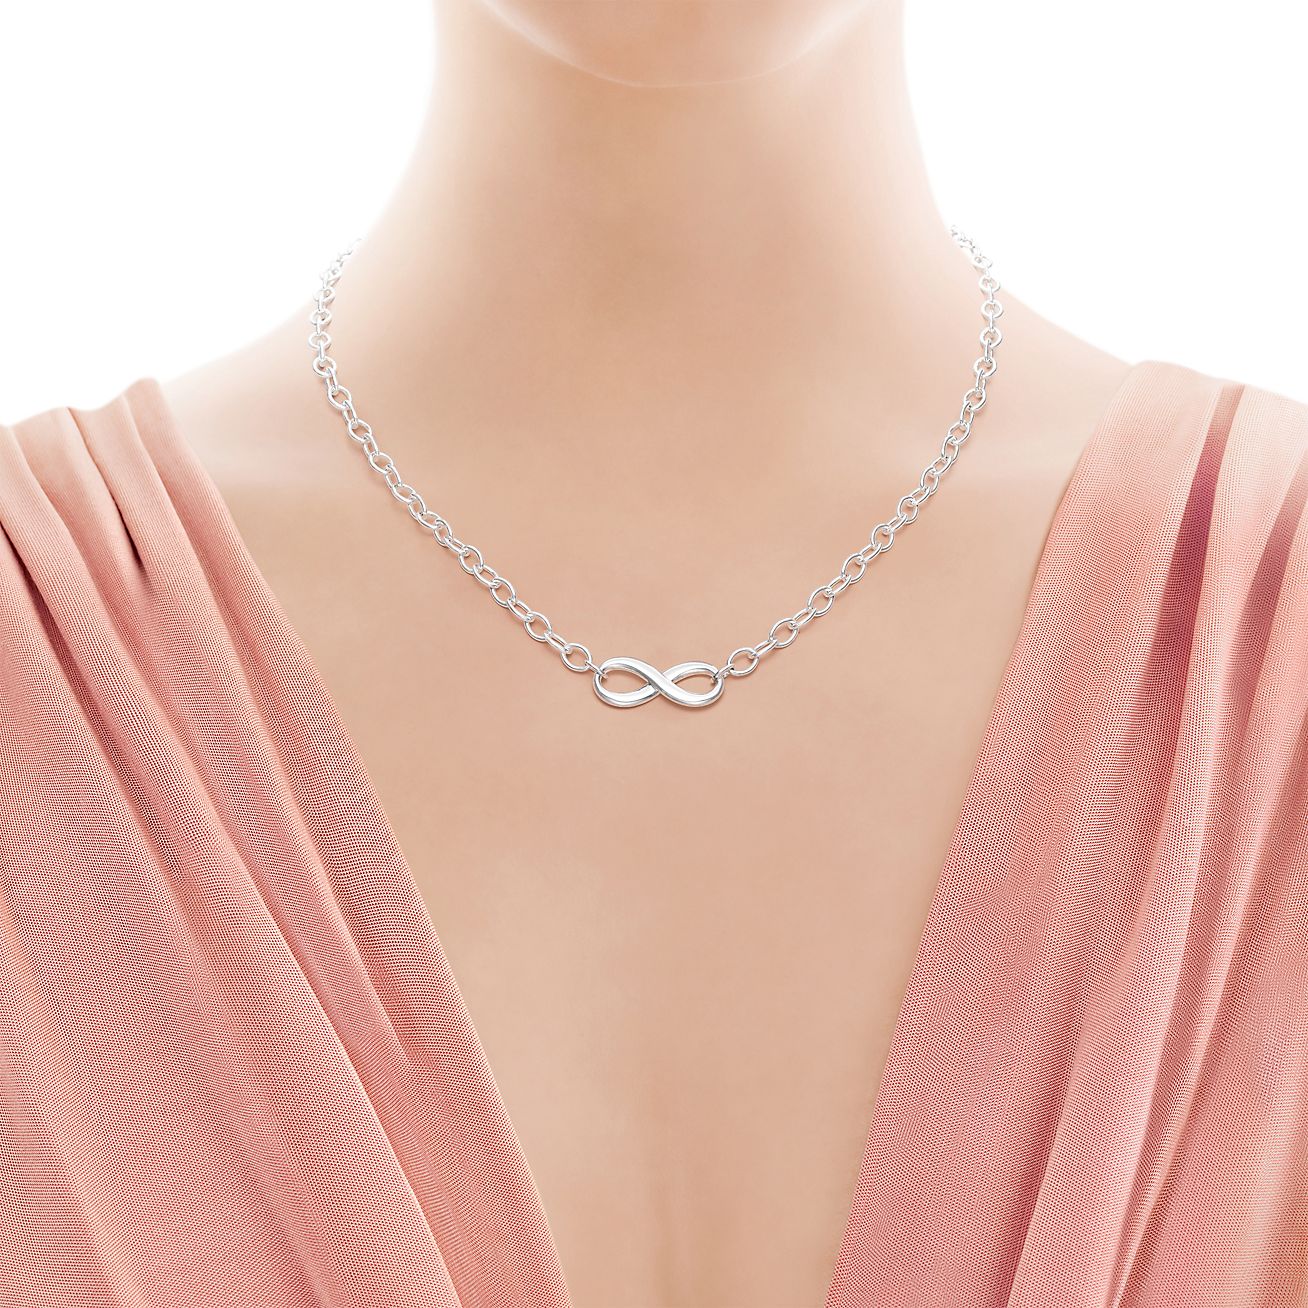 Tiffany & Co. Infinity Pendant Necklace - Sterling Silver Pendant Necklace,  Necklaces - TIF275221 | The RealReal